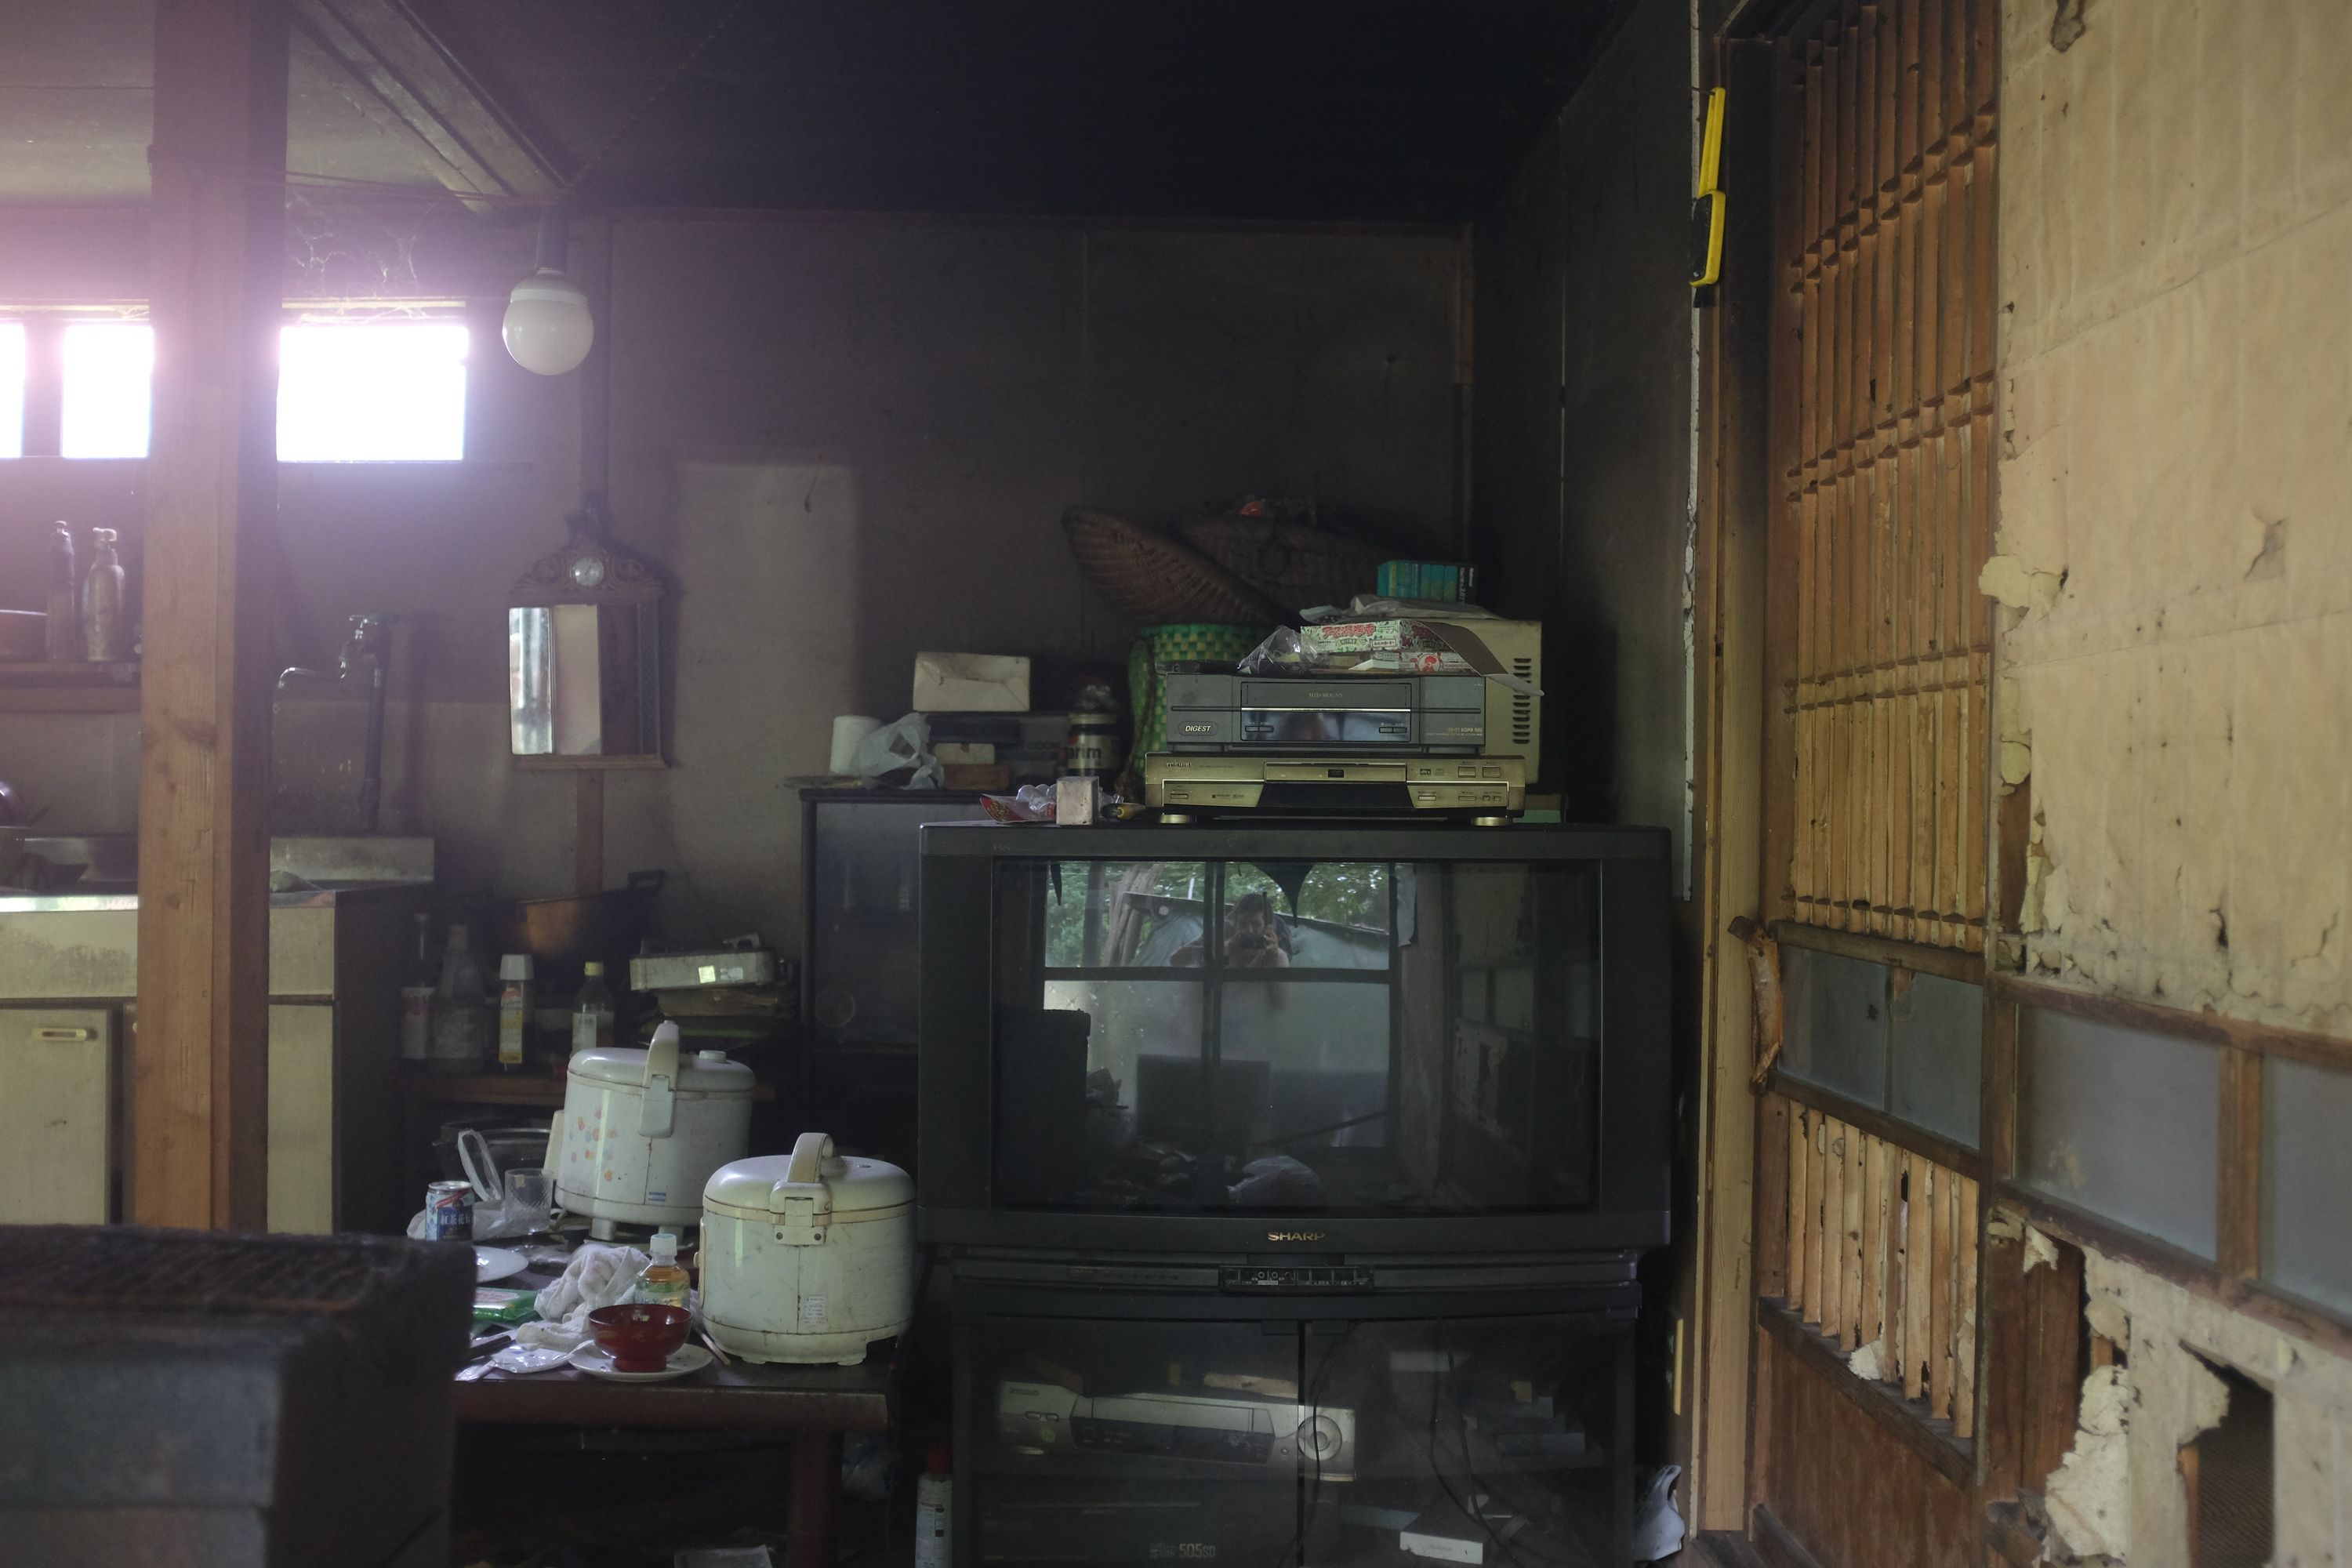 The kitchen of an abandoned house, showing appliances and kitchenware strewn about, with the author reflected in the screen of a television set.